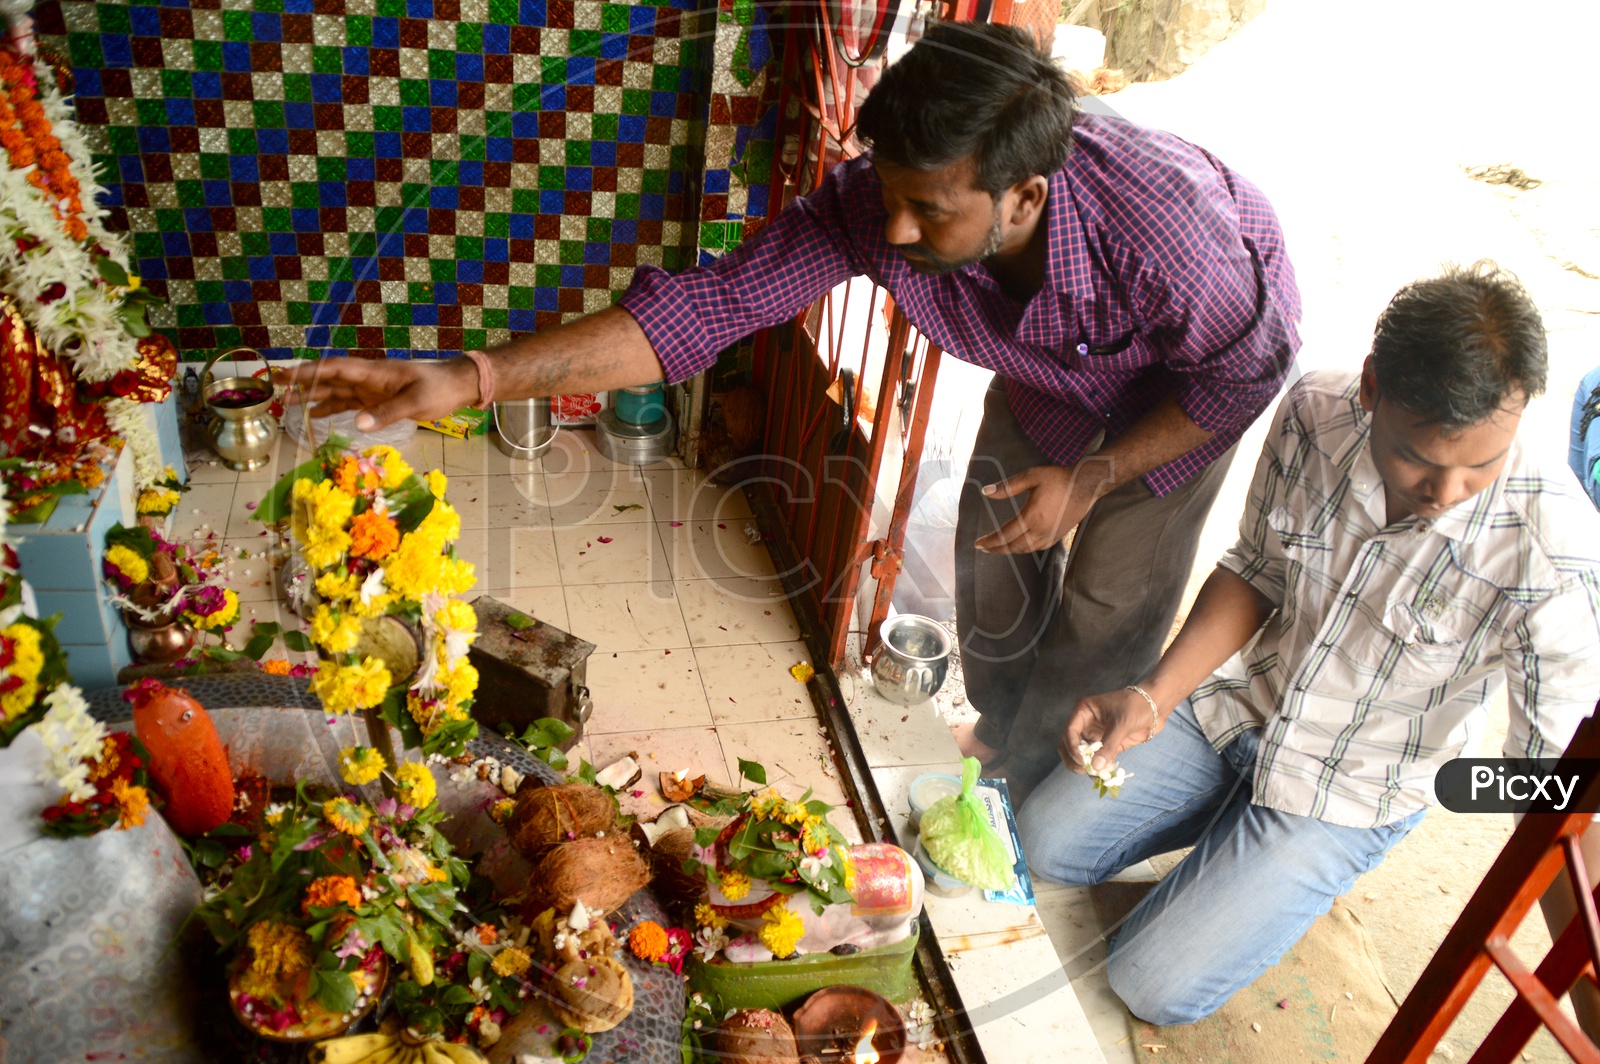 Indian men offering prayers in a temple